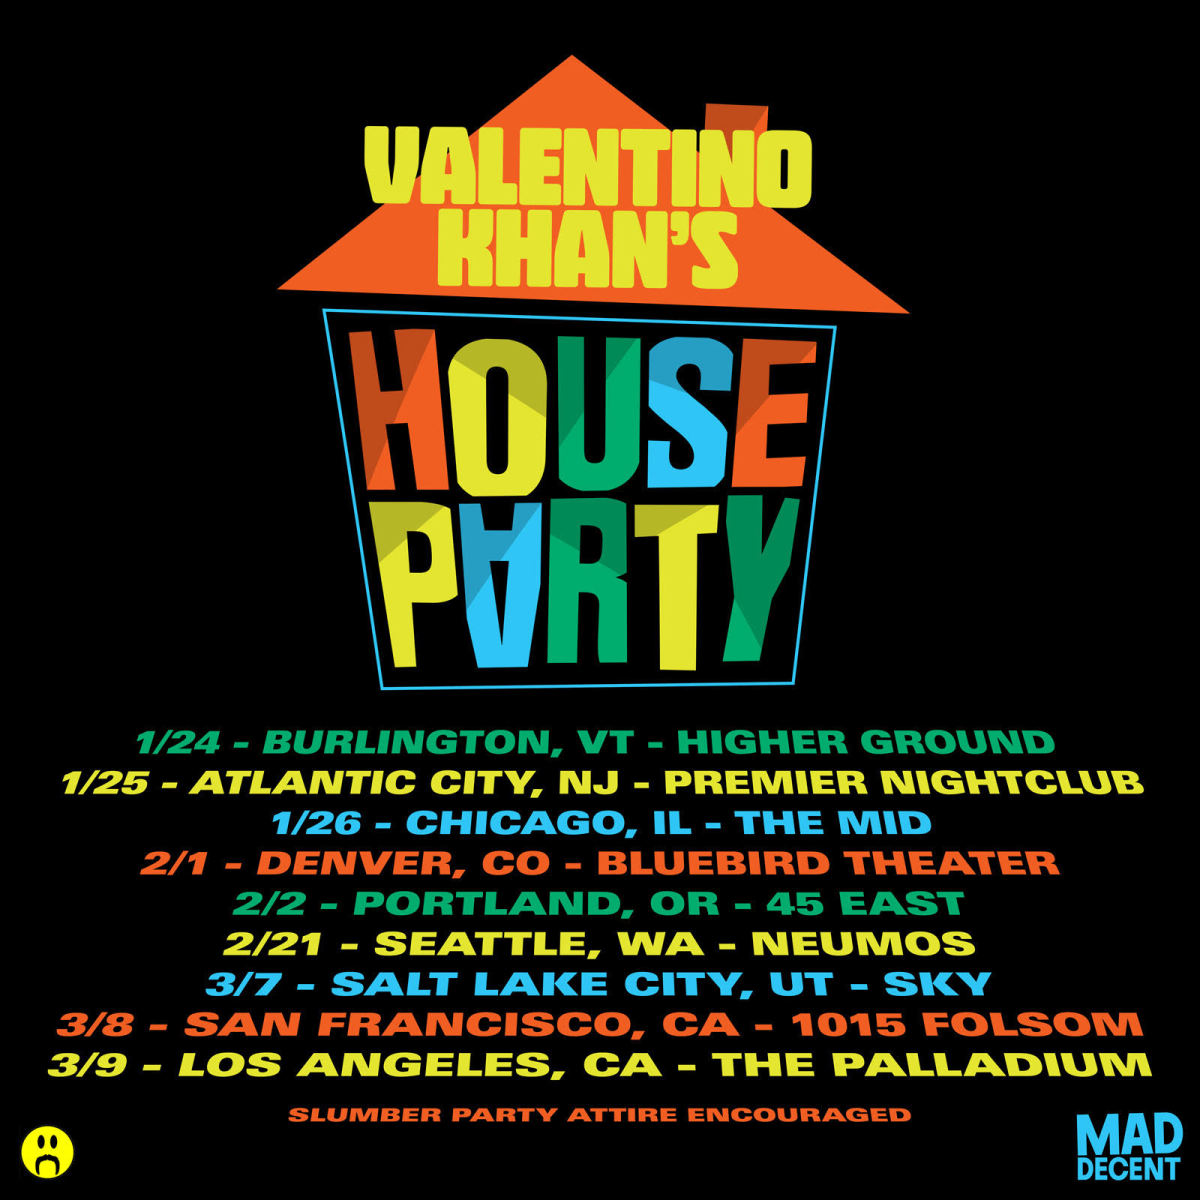 Valentino Khan House Party